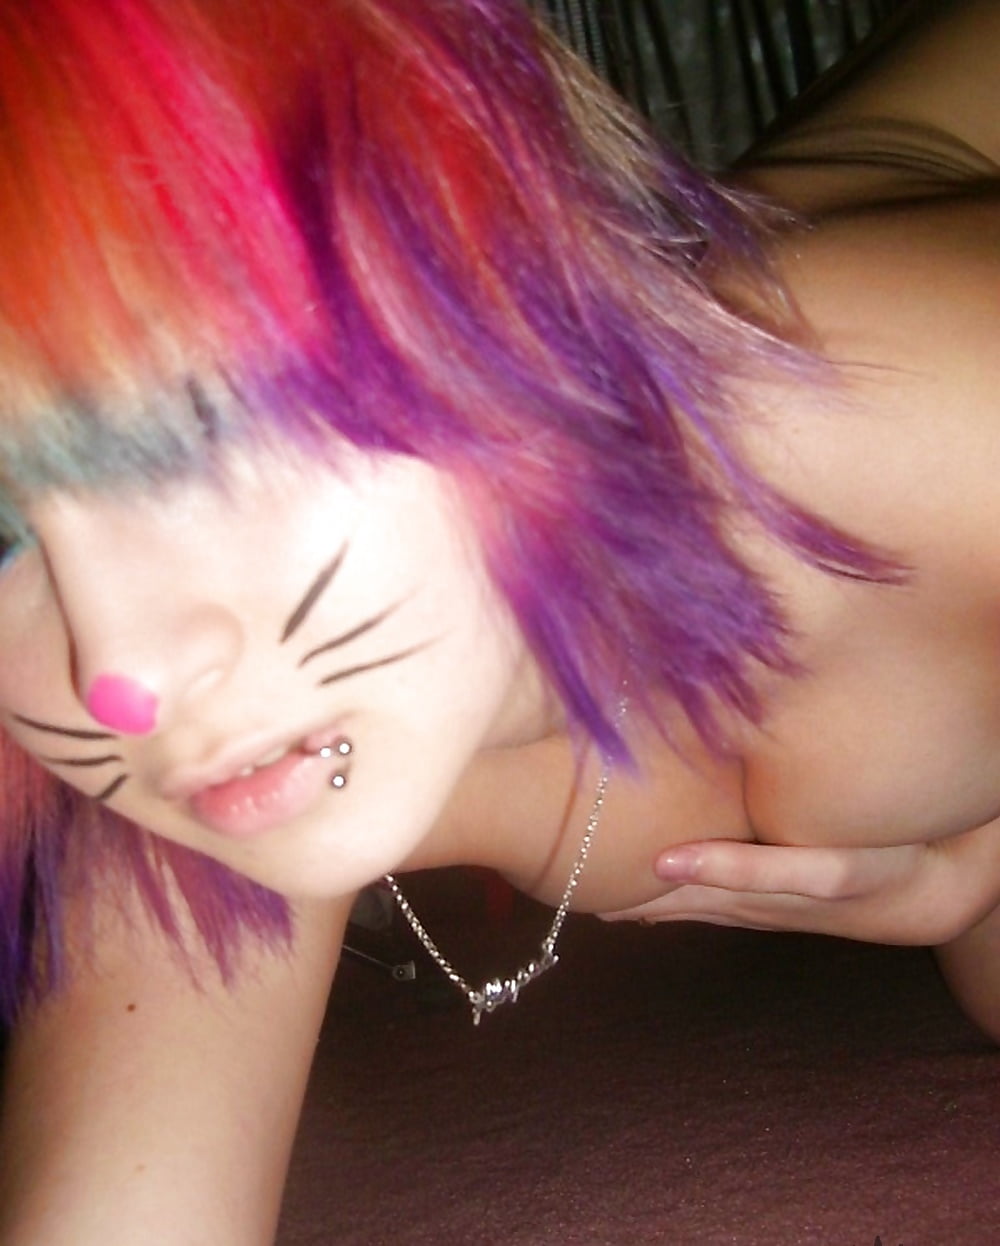 Stunning Girl with Colourful Hair - Photo #1.